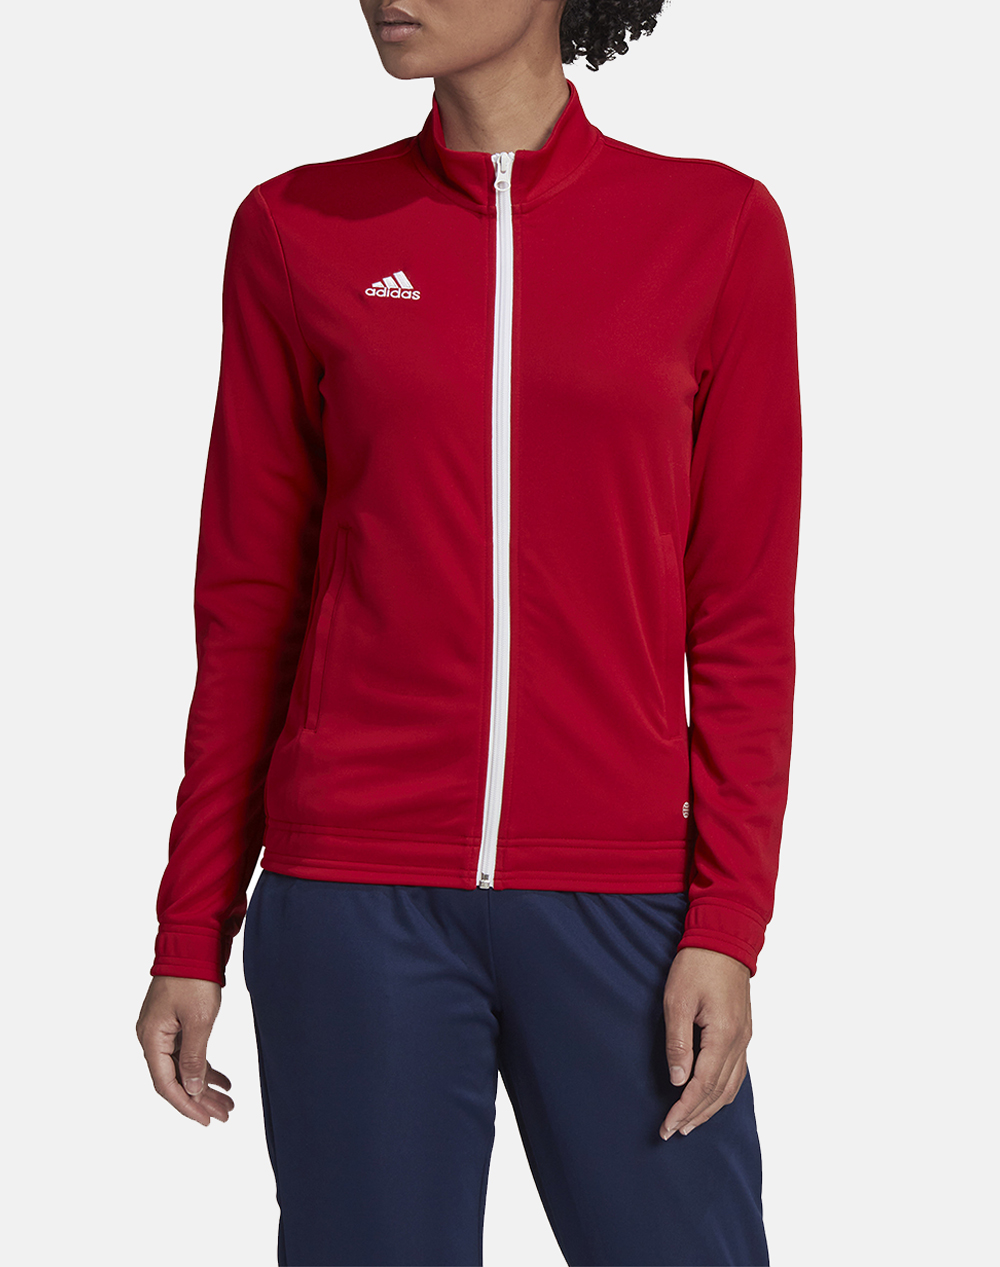 ADIDAS ENT22 TK JKTW H57562-RED Red